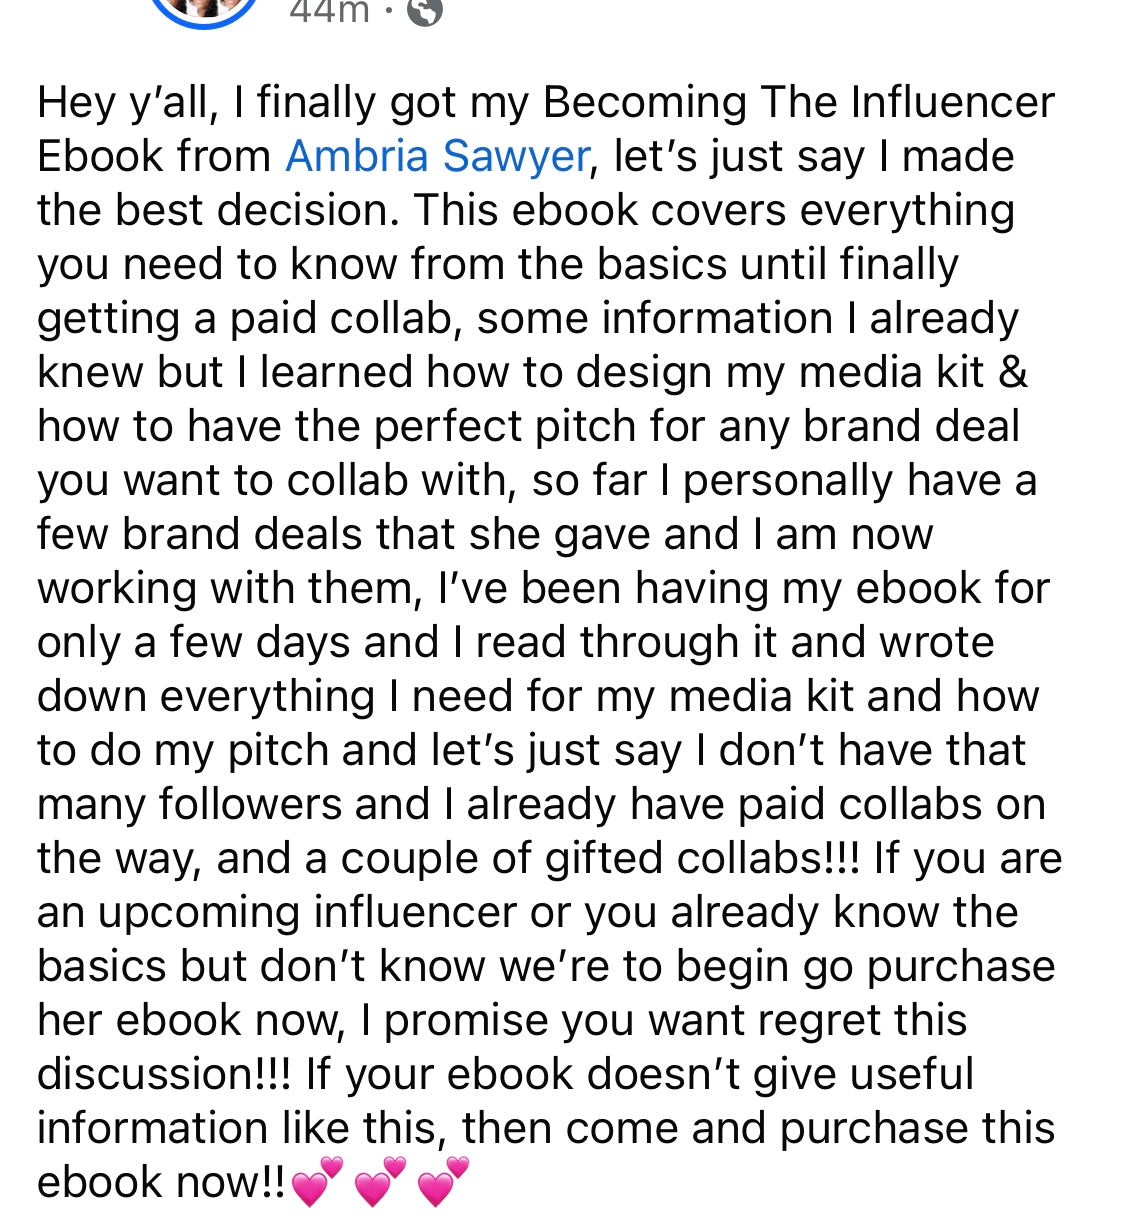 how to become an influencer on instagram, how to become a micro influencer, how to become an influenver and get paid, how to become an influencer on Facebook, how to become a brand influencer, how to become an influencer on tiktok,how to become a successful influencer